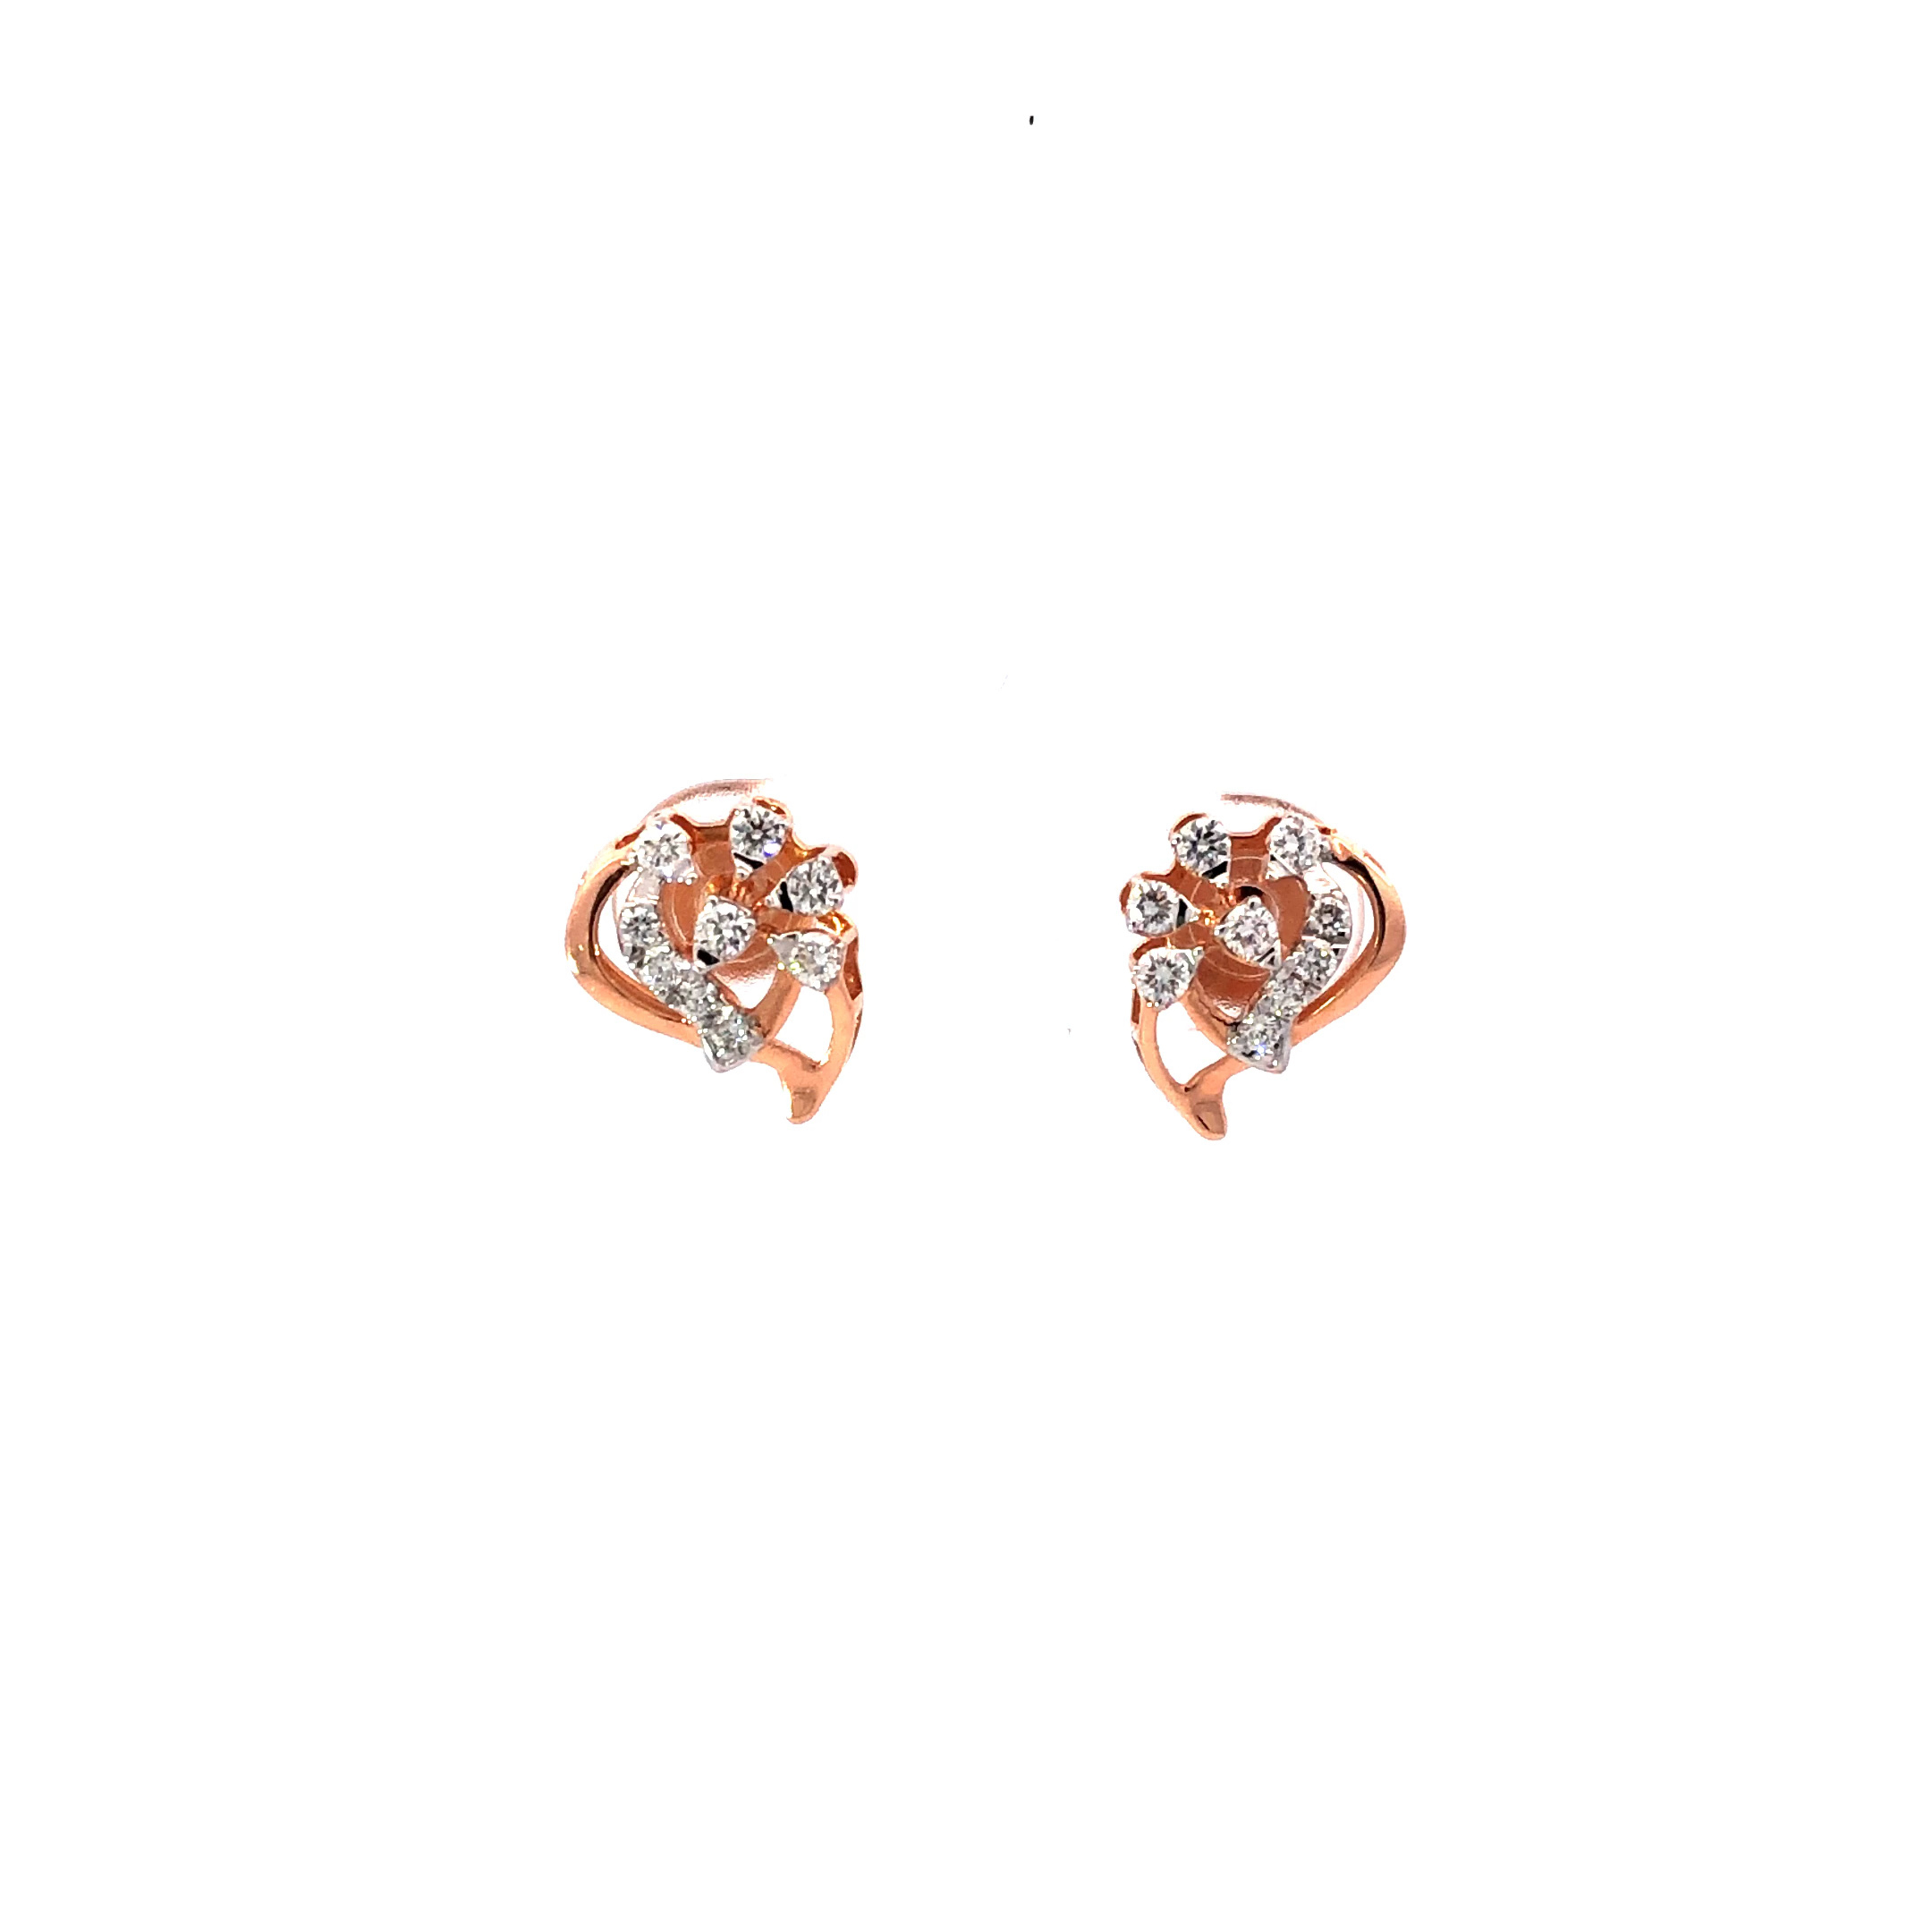 The Rio Leaf Earrings  Diamond Jewellery at Best Prices in India   SarvadaJewelscom